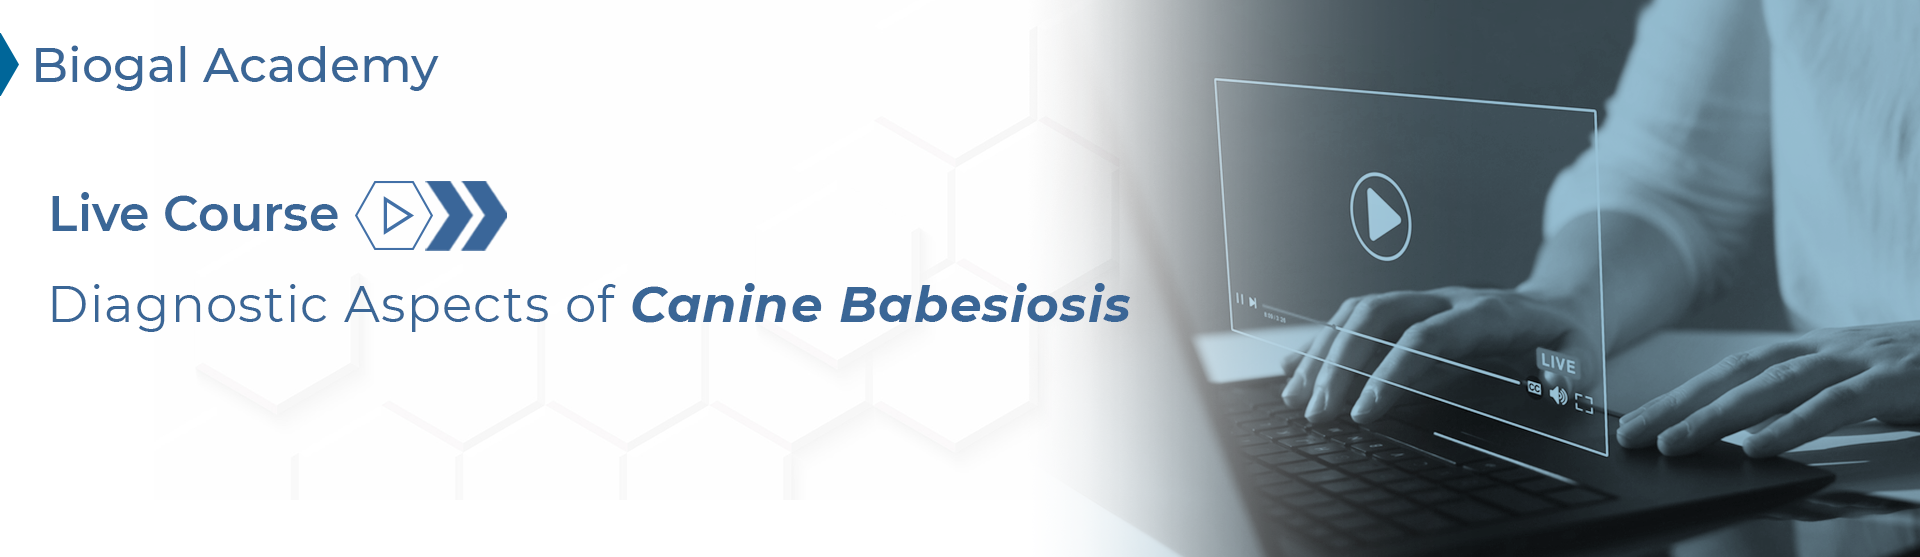 Diagnostic Aspects of Canine Babesiosis